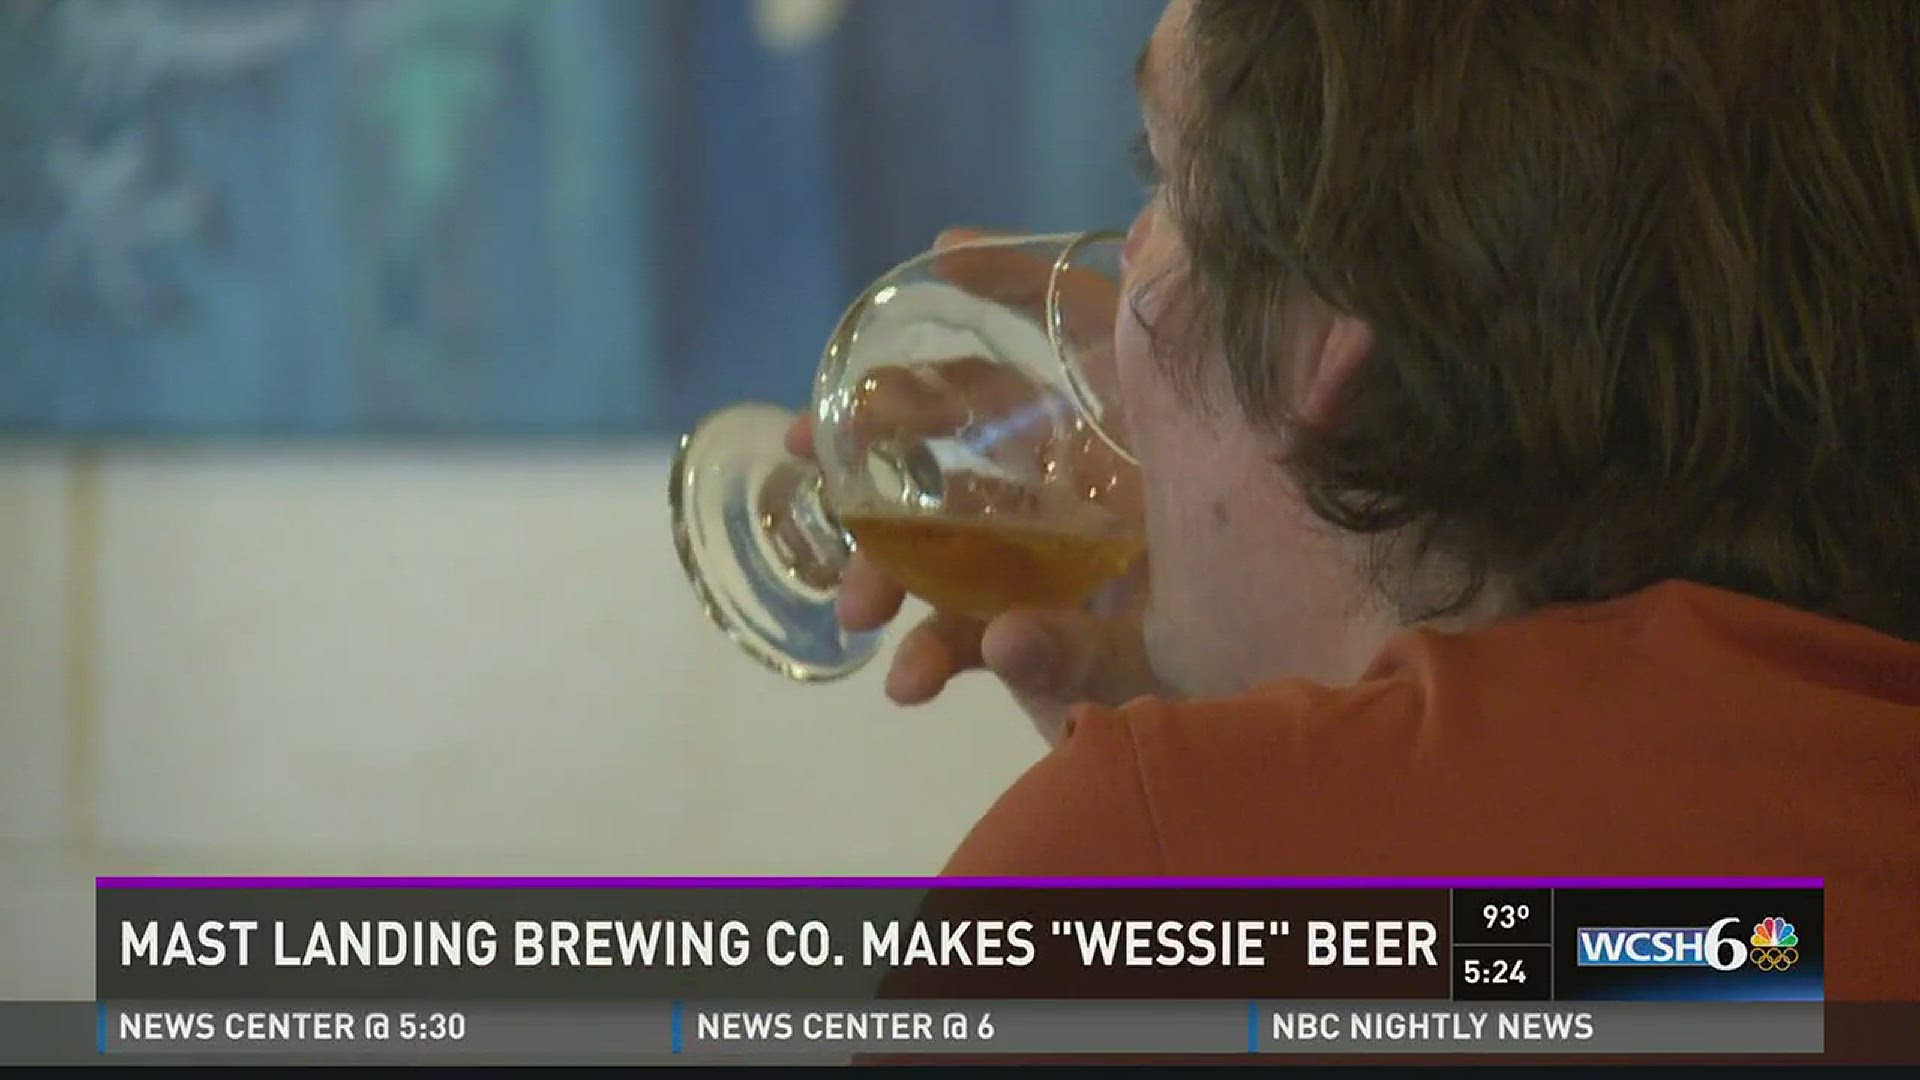 Wessie the beer launched at Mast Landing Brewing Co.